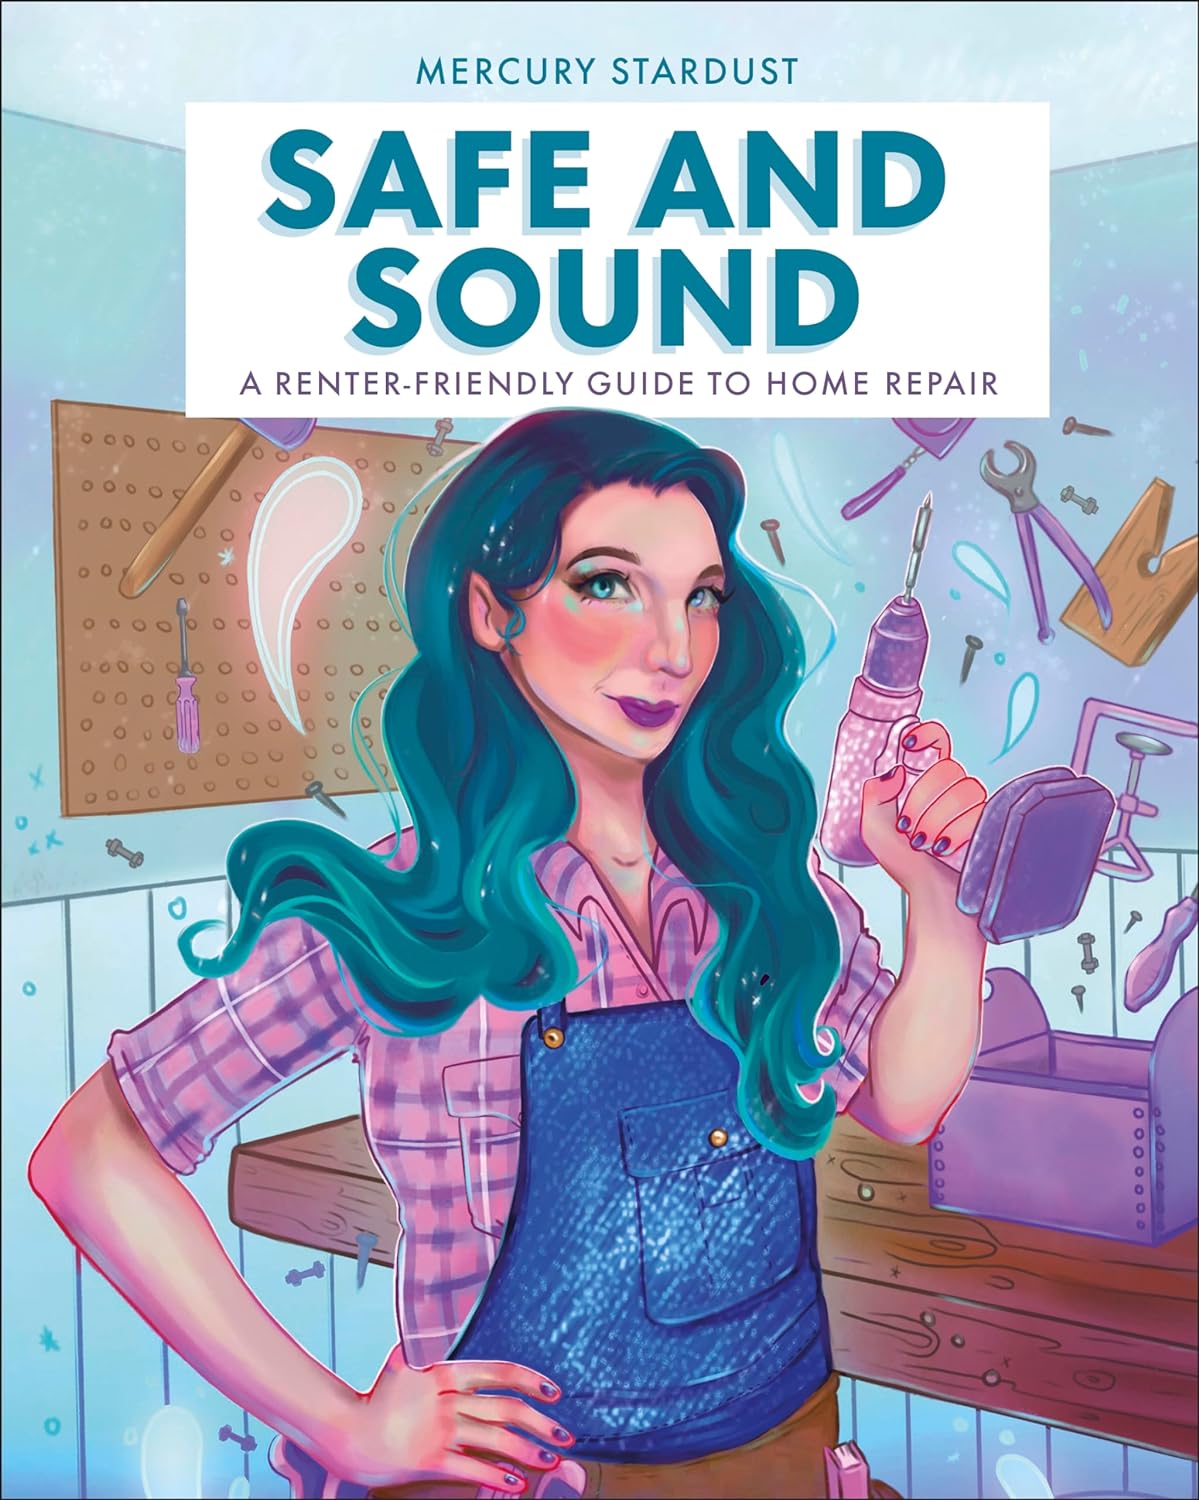 Safe and Sound: A Renter-Friendly Guide to Home Repair - by Mercury Stardust (Hardcover)